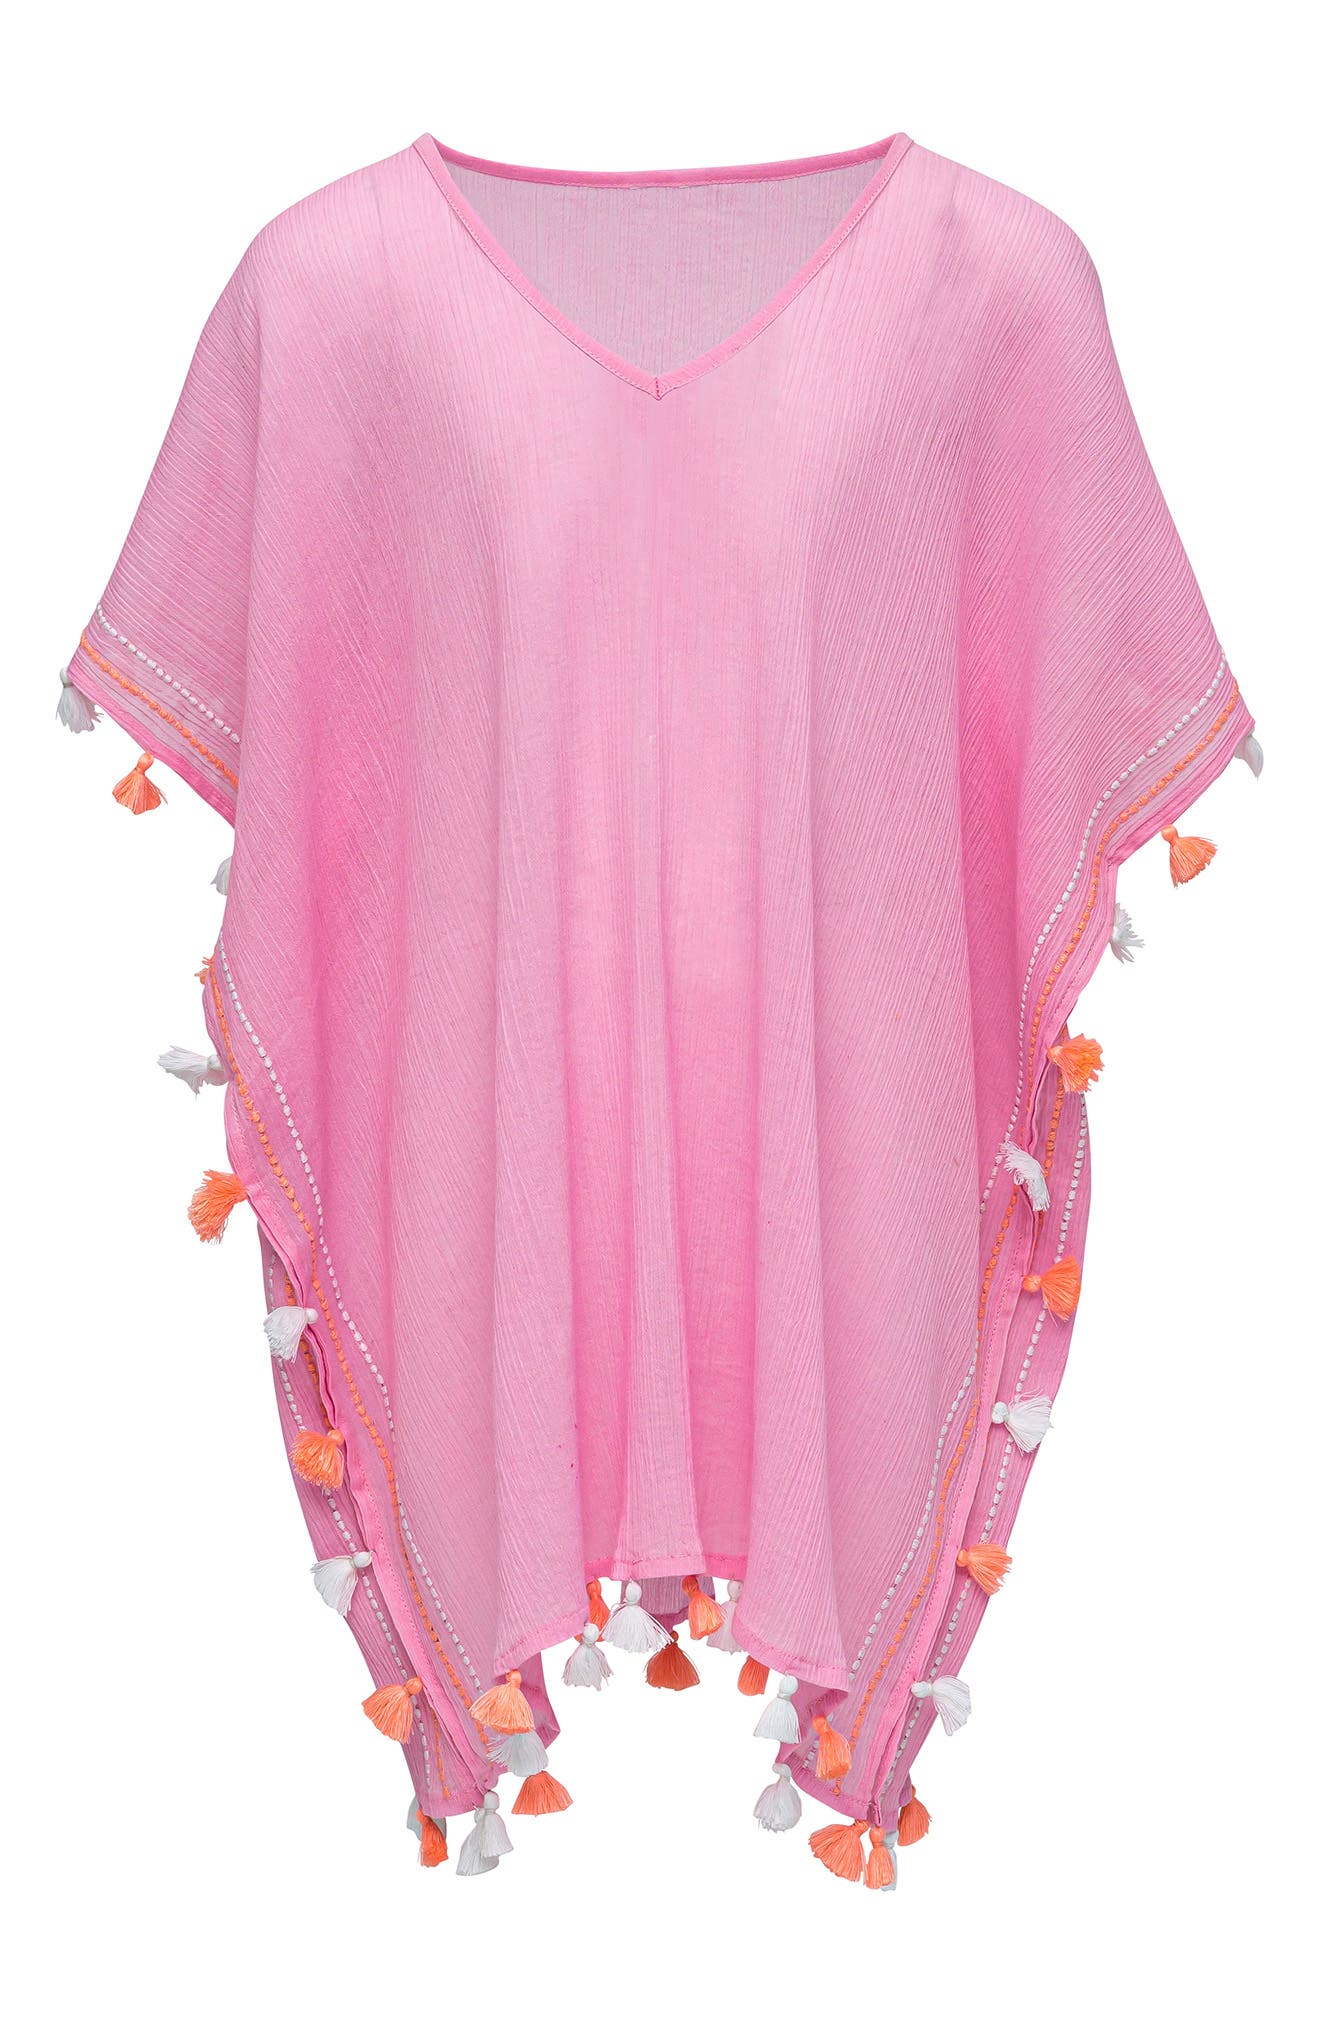 Nordstrom Clothing Dresses Beach Dresses Kids Pinkalicious Tassel Cover-Up Caftan at Nordstrom 